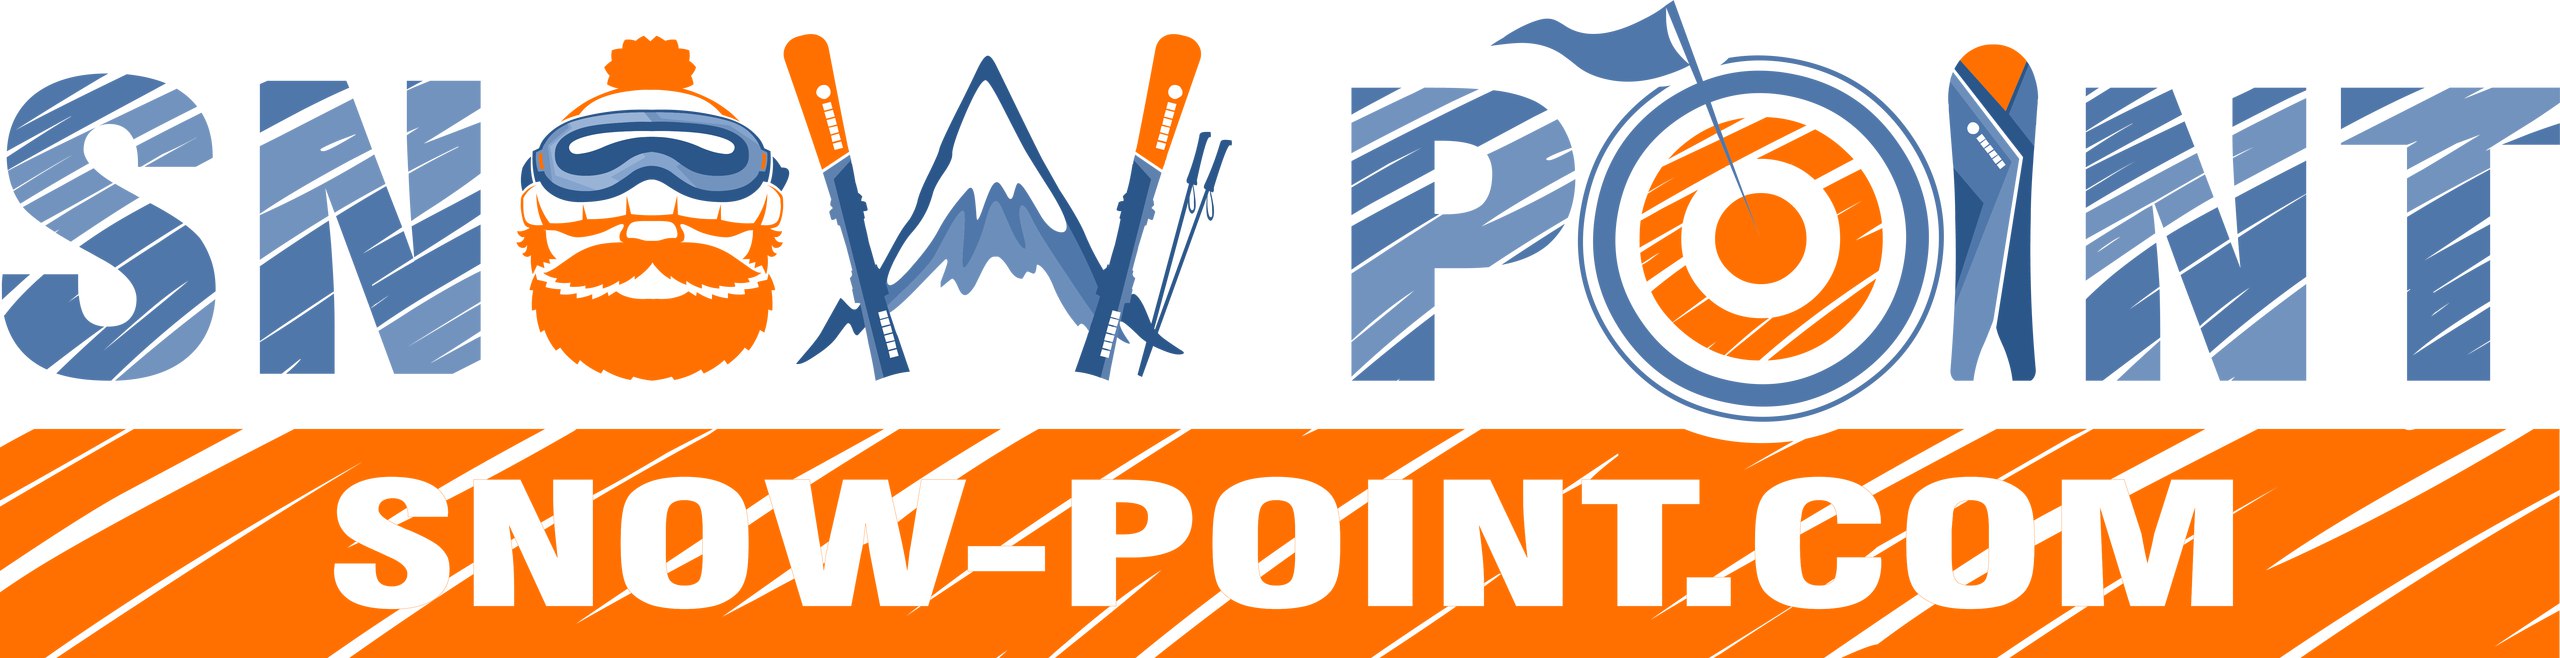 snow-point.com all in one ski suits and freeski clothing